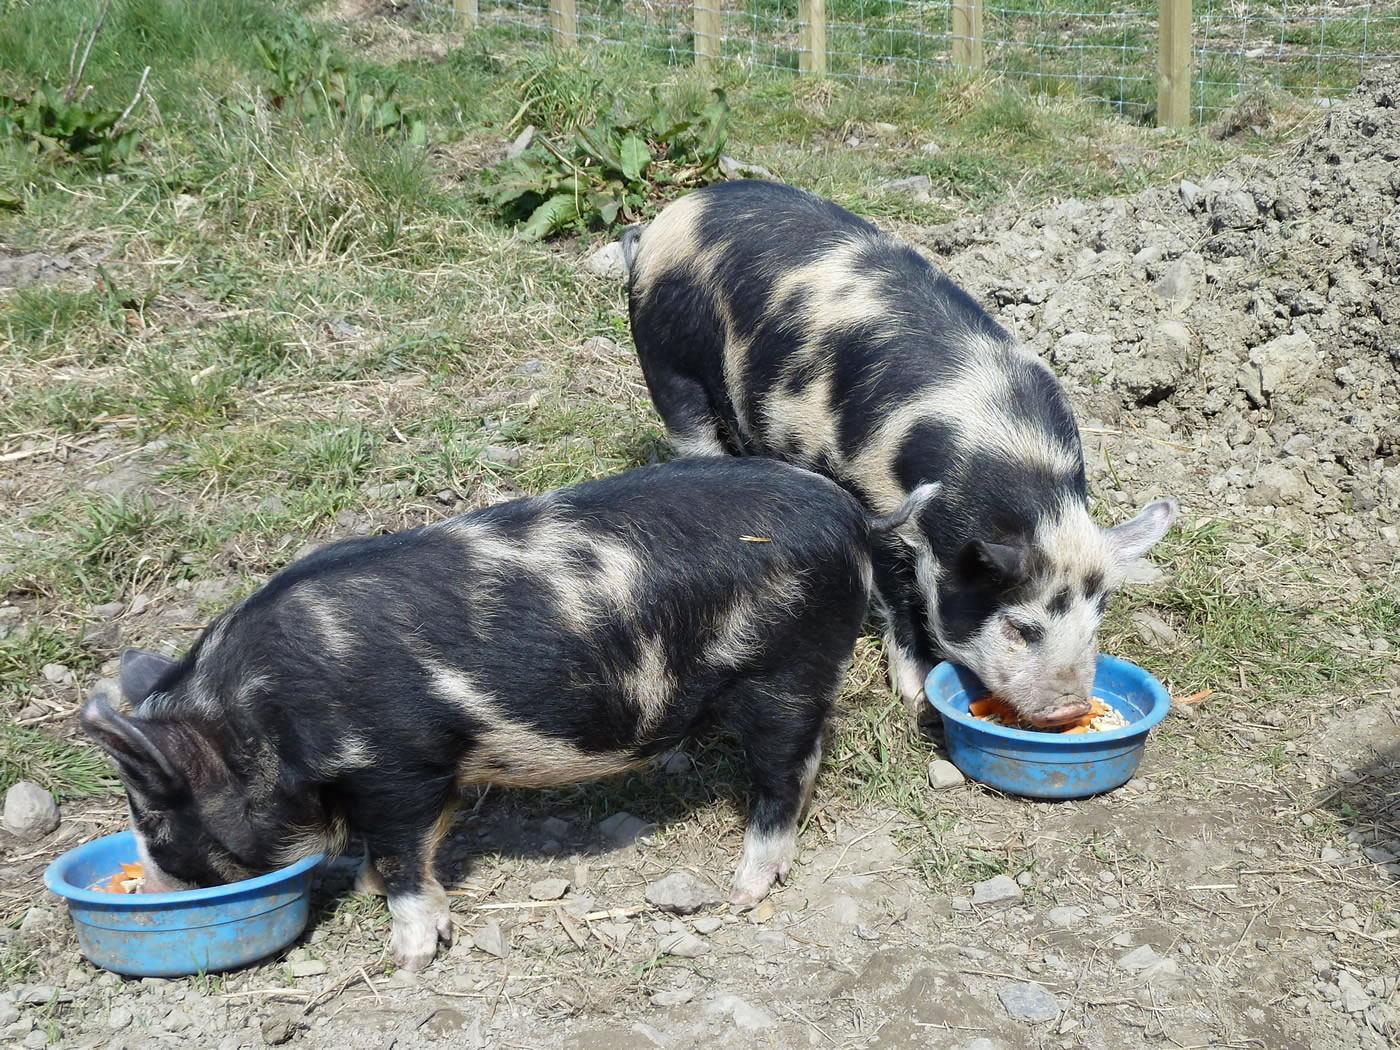 Picture of our pet pigs eating their breakfast.